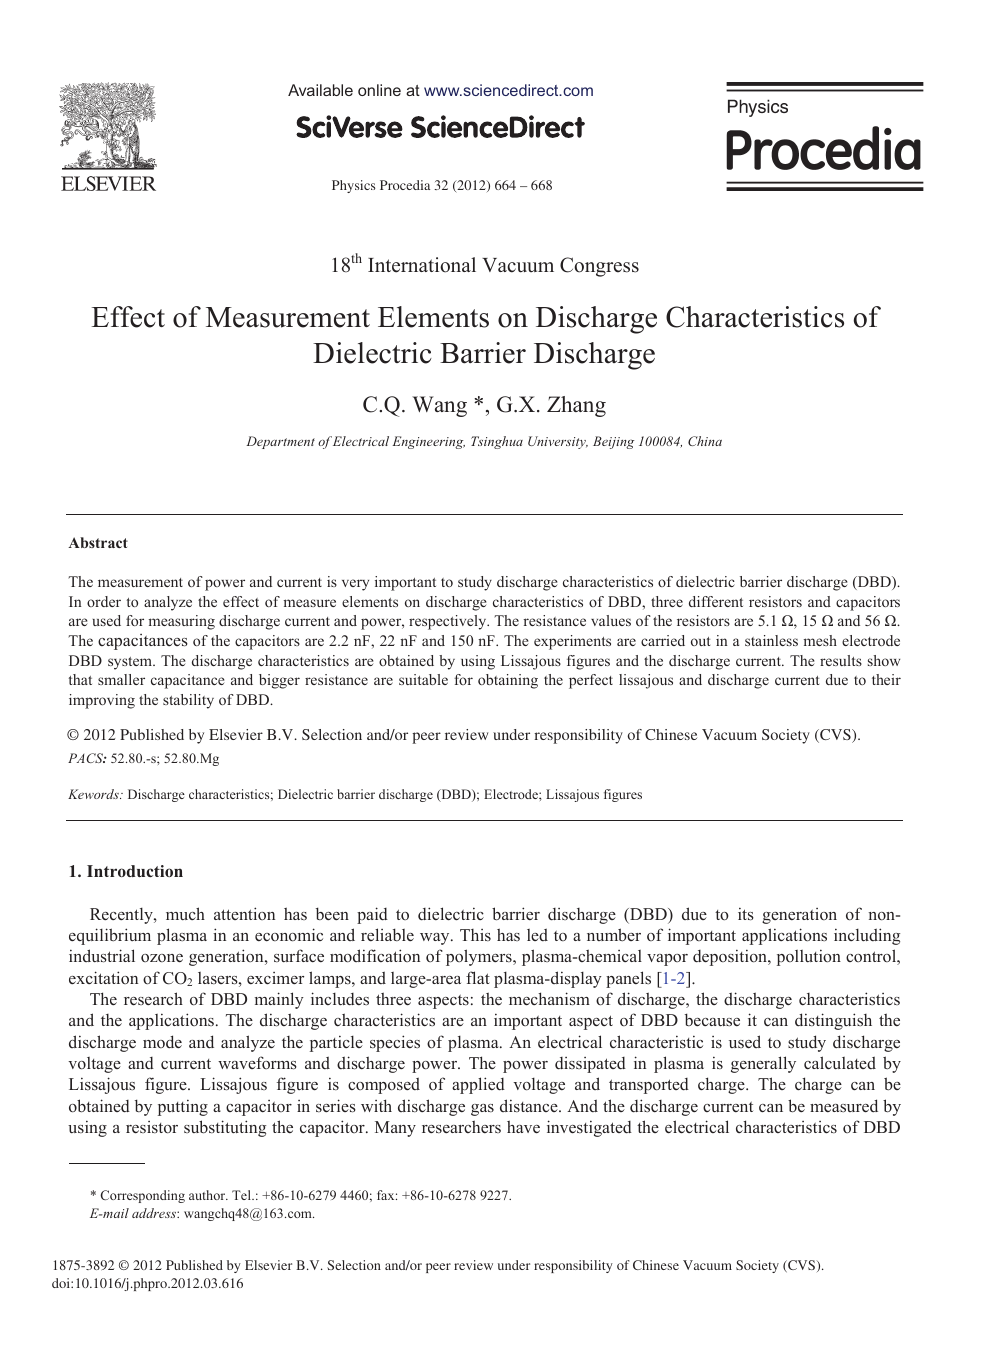 Effect Of Measurement Elements On Discharge Characteristics Of Dielectric Barrier Discharge Topic Of Research Paper In Materials Engineering Download Scholarly Article Pdf And Read For Free On Cyberleninka Open Science Hub